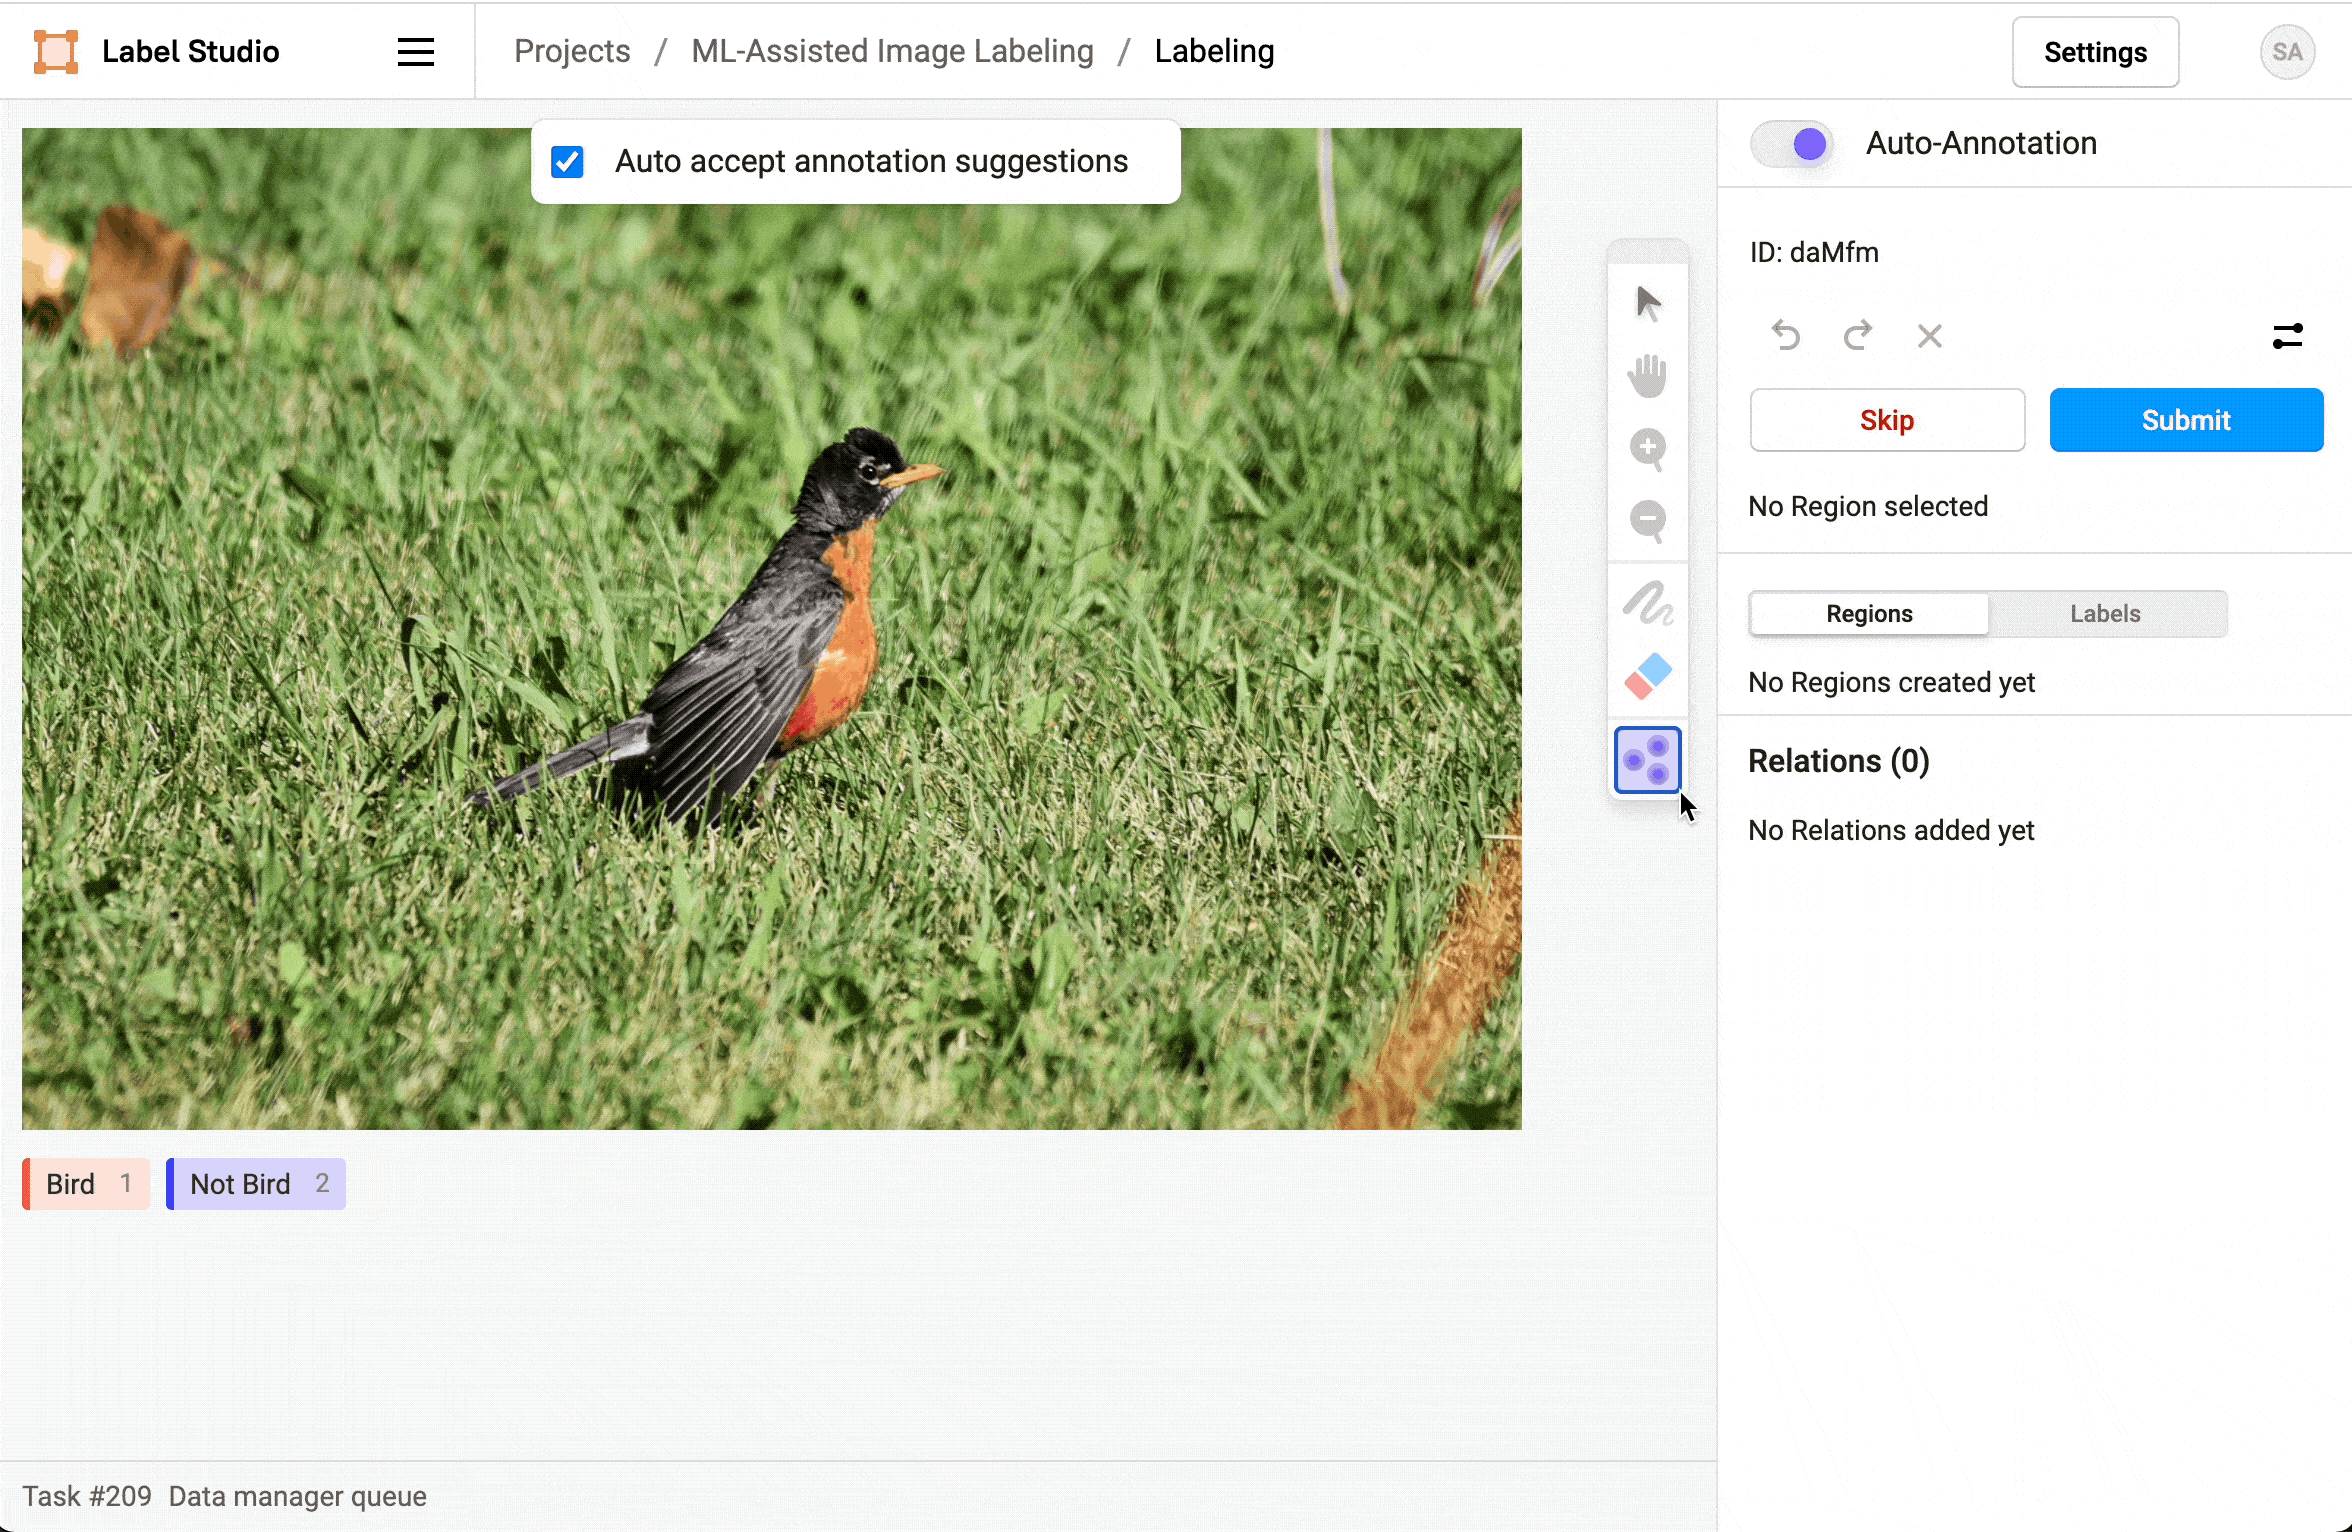 Same workflow as the owl gif, but this time featuring a robin or woodpecker-like bird.